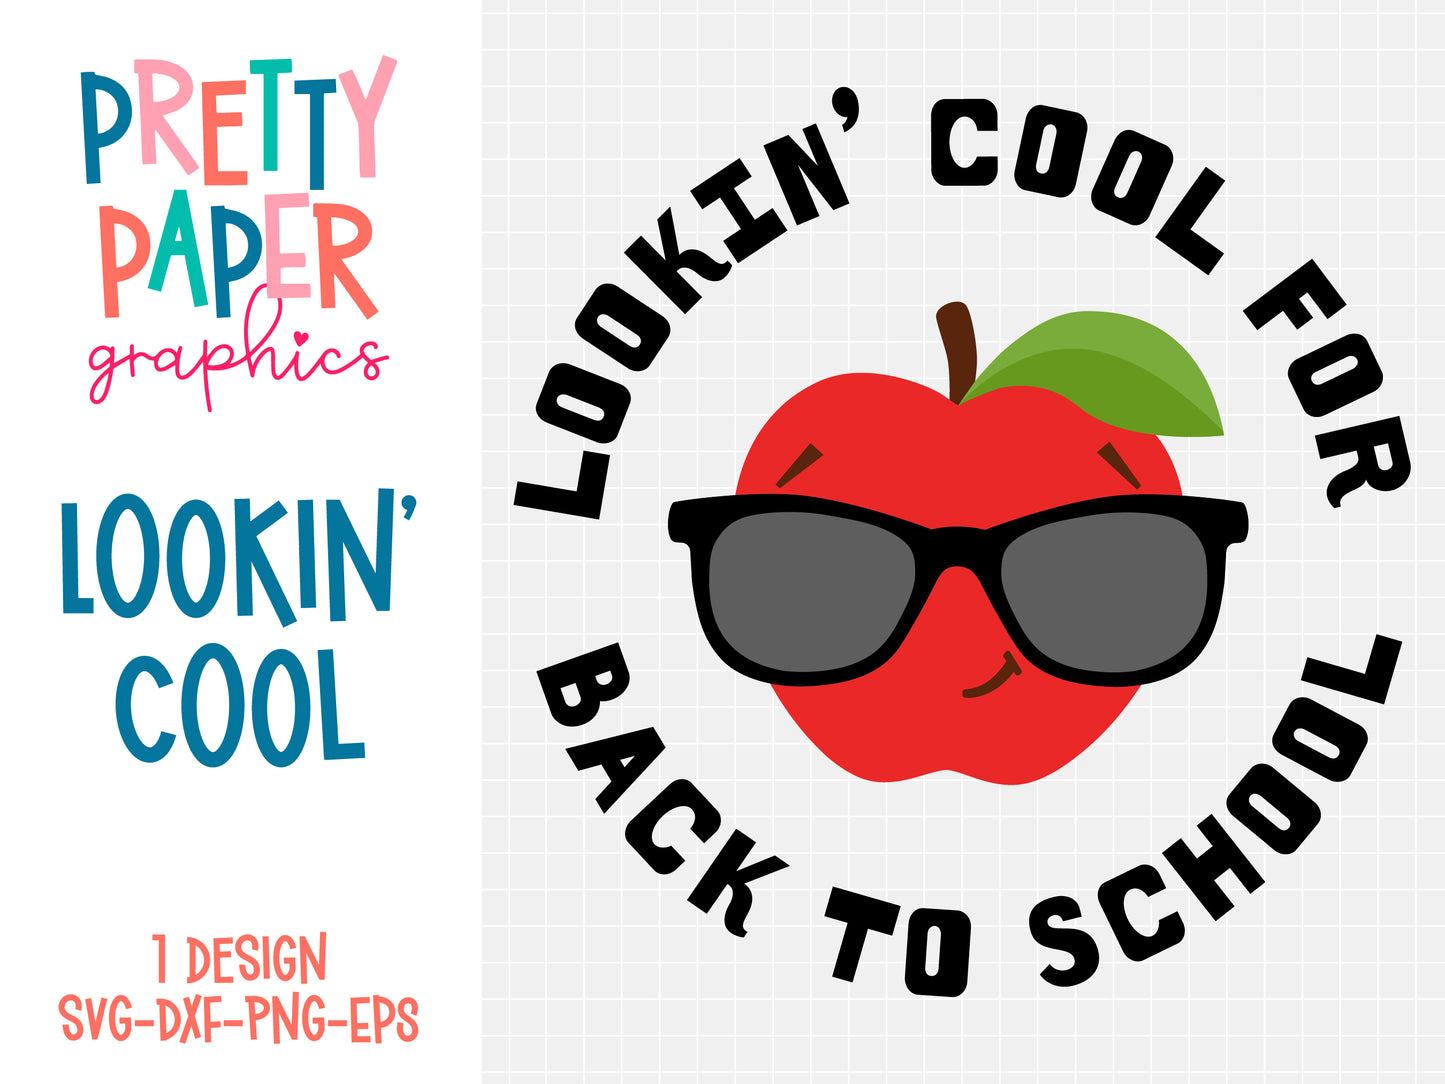 Lookin' Cool for Back to School SVG Cut Files by Pretty Paper Graphics with cute apple wearing sunglasses